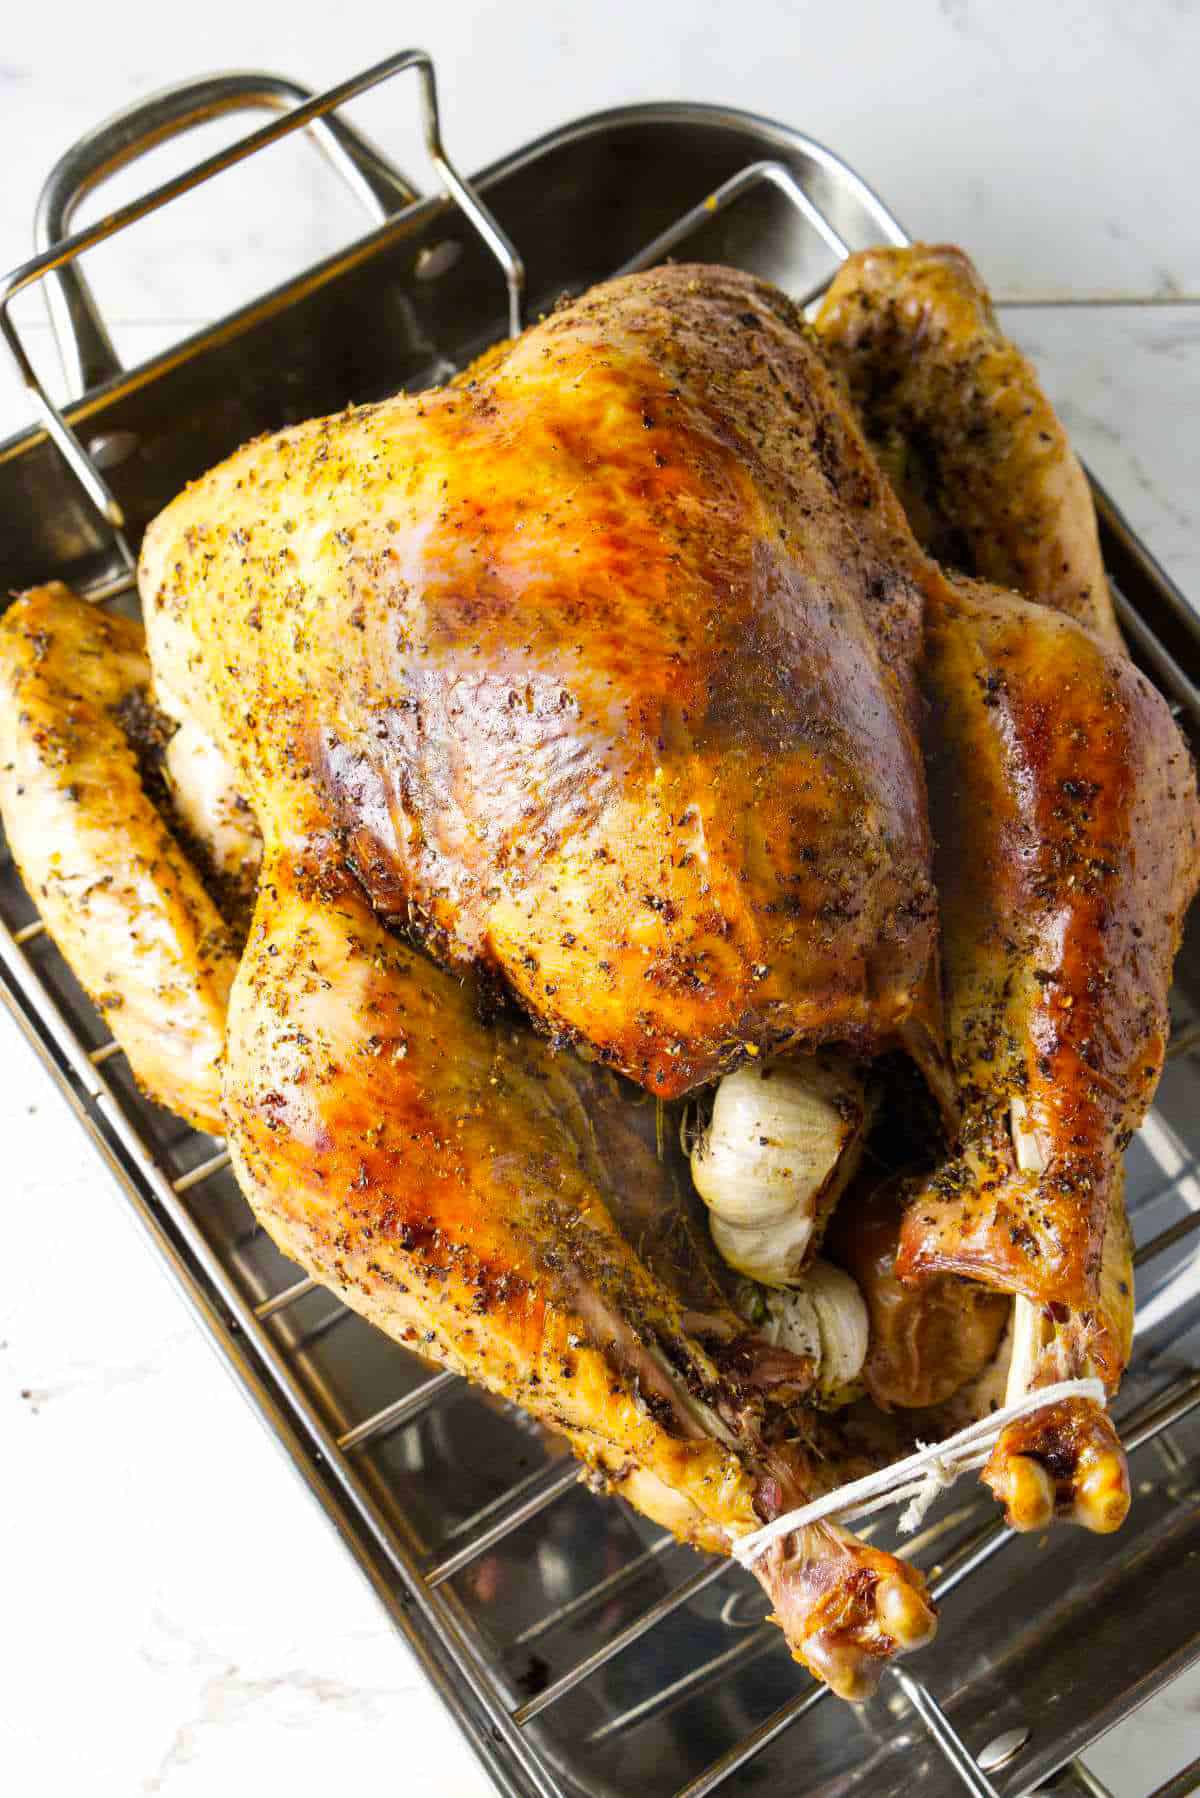 Freshly roasted convection oven turkey.